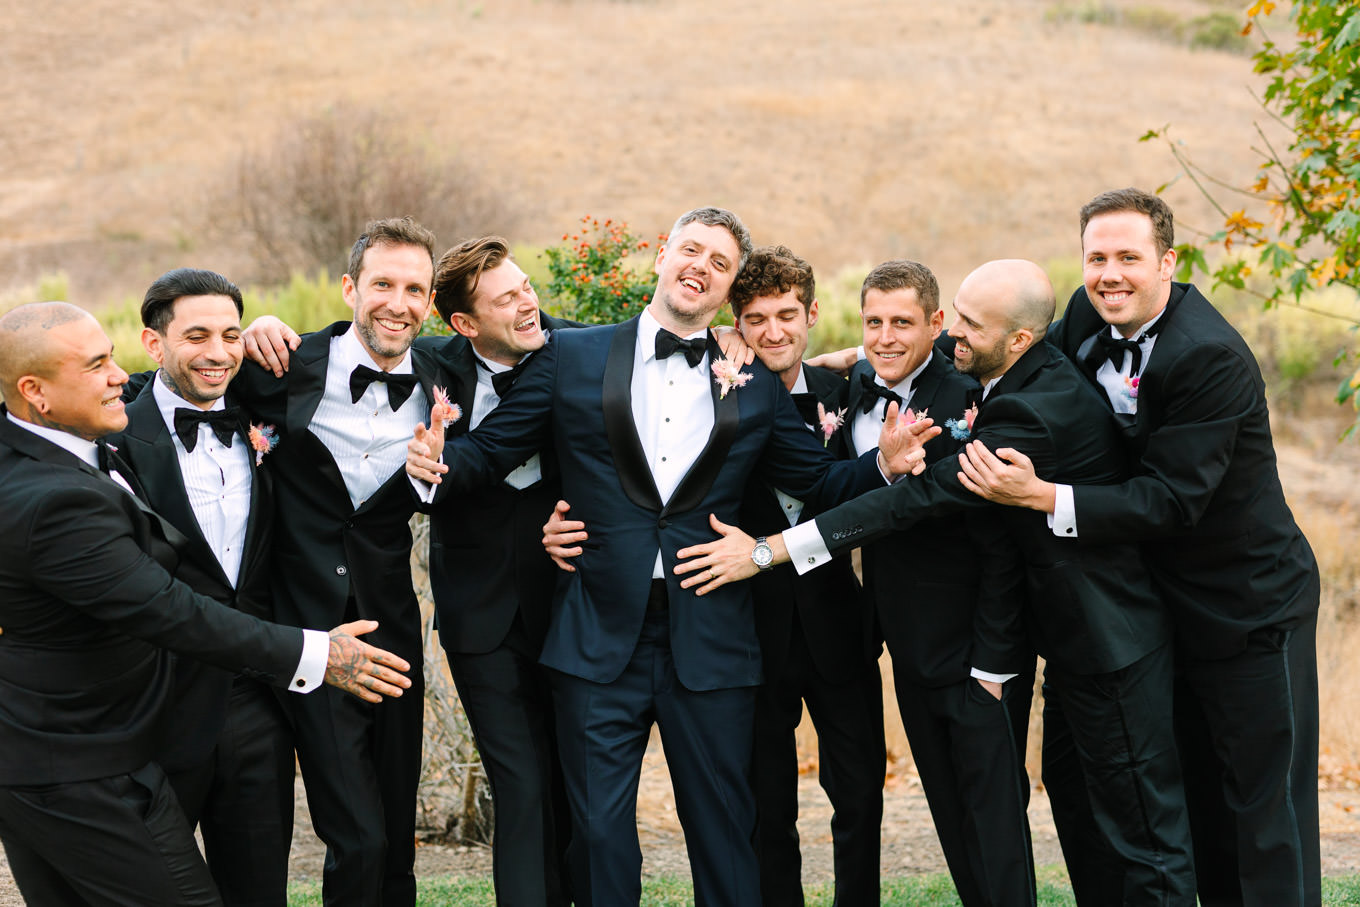 Groomsmen portrait | Colorful and quirky wedding at Higuera Ranch in San Luis Obispo | #sanluisobispowedding #californiawedding #higueraranch #madonnainn   
Source: Mary Costa Photography | Los Angeles